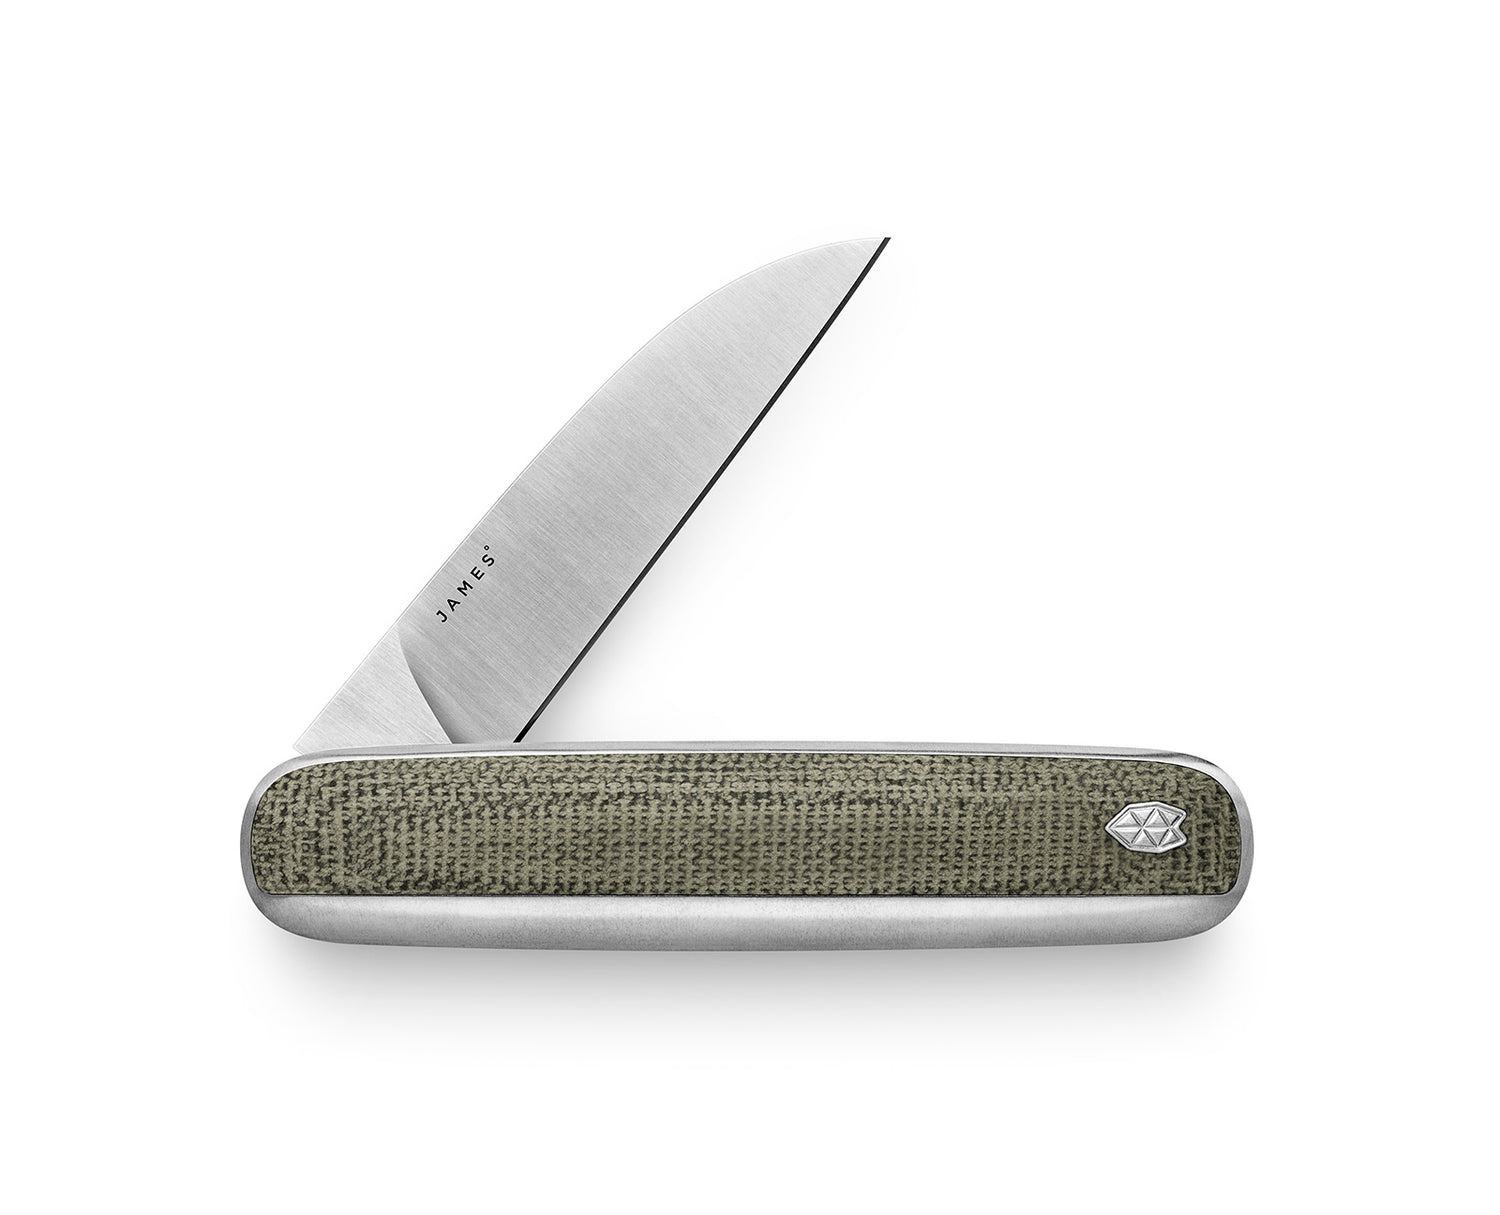 The Pike knife with OD green micarta handle and stainless steel blade